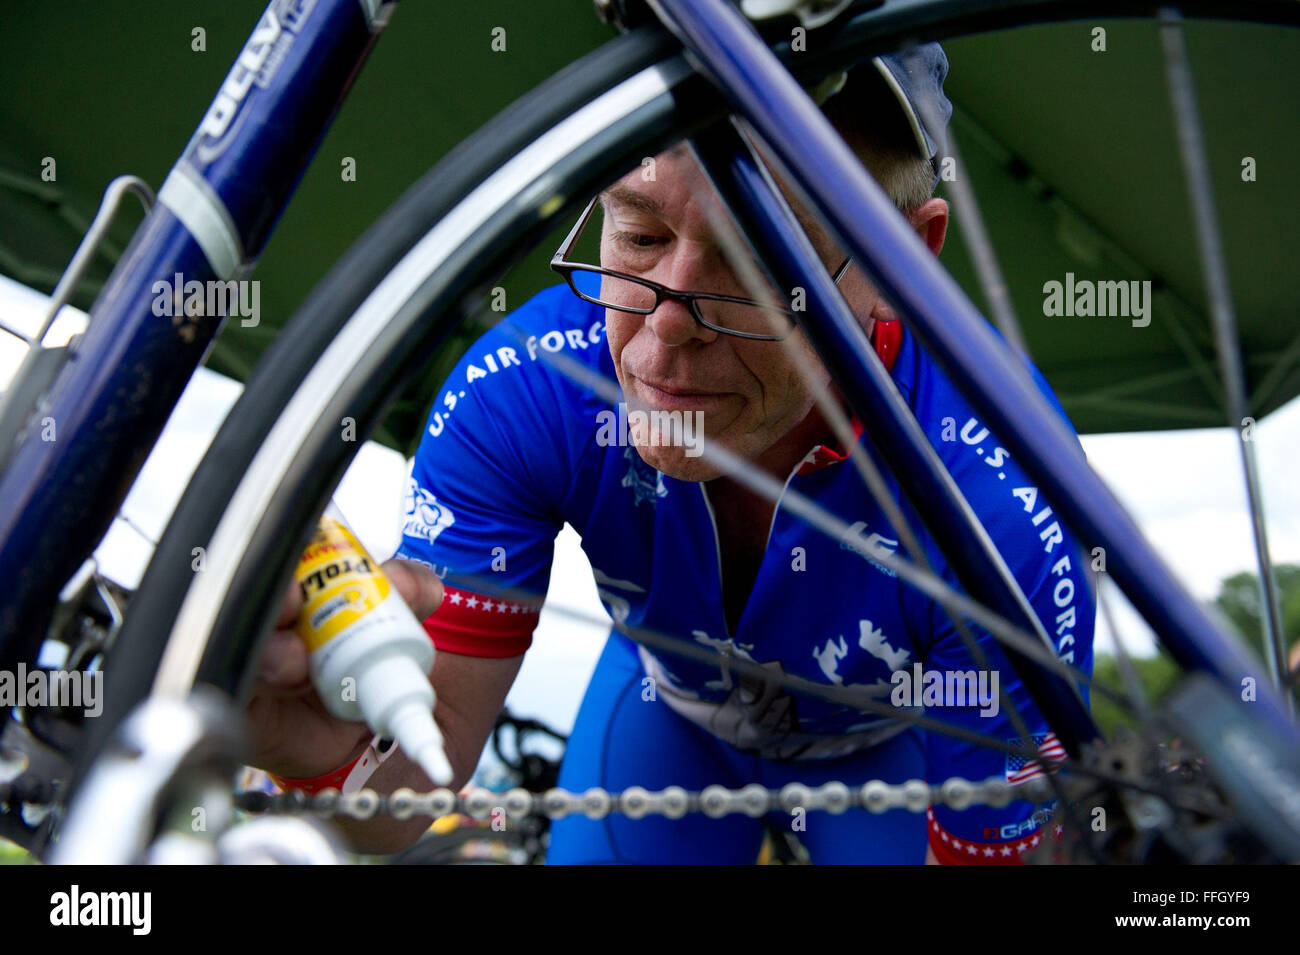 Ron Phipps lubes his chain before the first day of riding in the RAGBRAI in Sioux Center, Iowa. Phipps has been on the RAGBRAI Air Force Cycle Team for 12 years and said proper bike maintenance is essential to prevent breakdowns throughout the week. Phipps is an instructor at the Air Force Institute of Technology at Wright Patterson Air Force Base, Ohio. Stock Photo